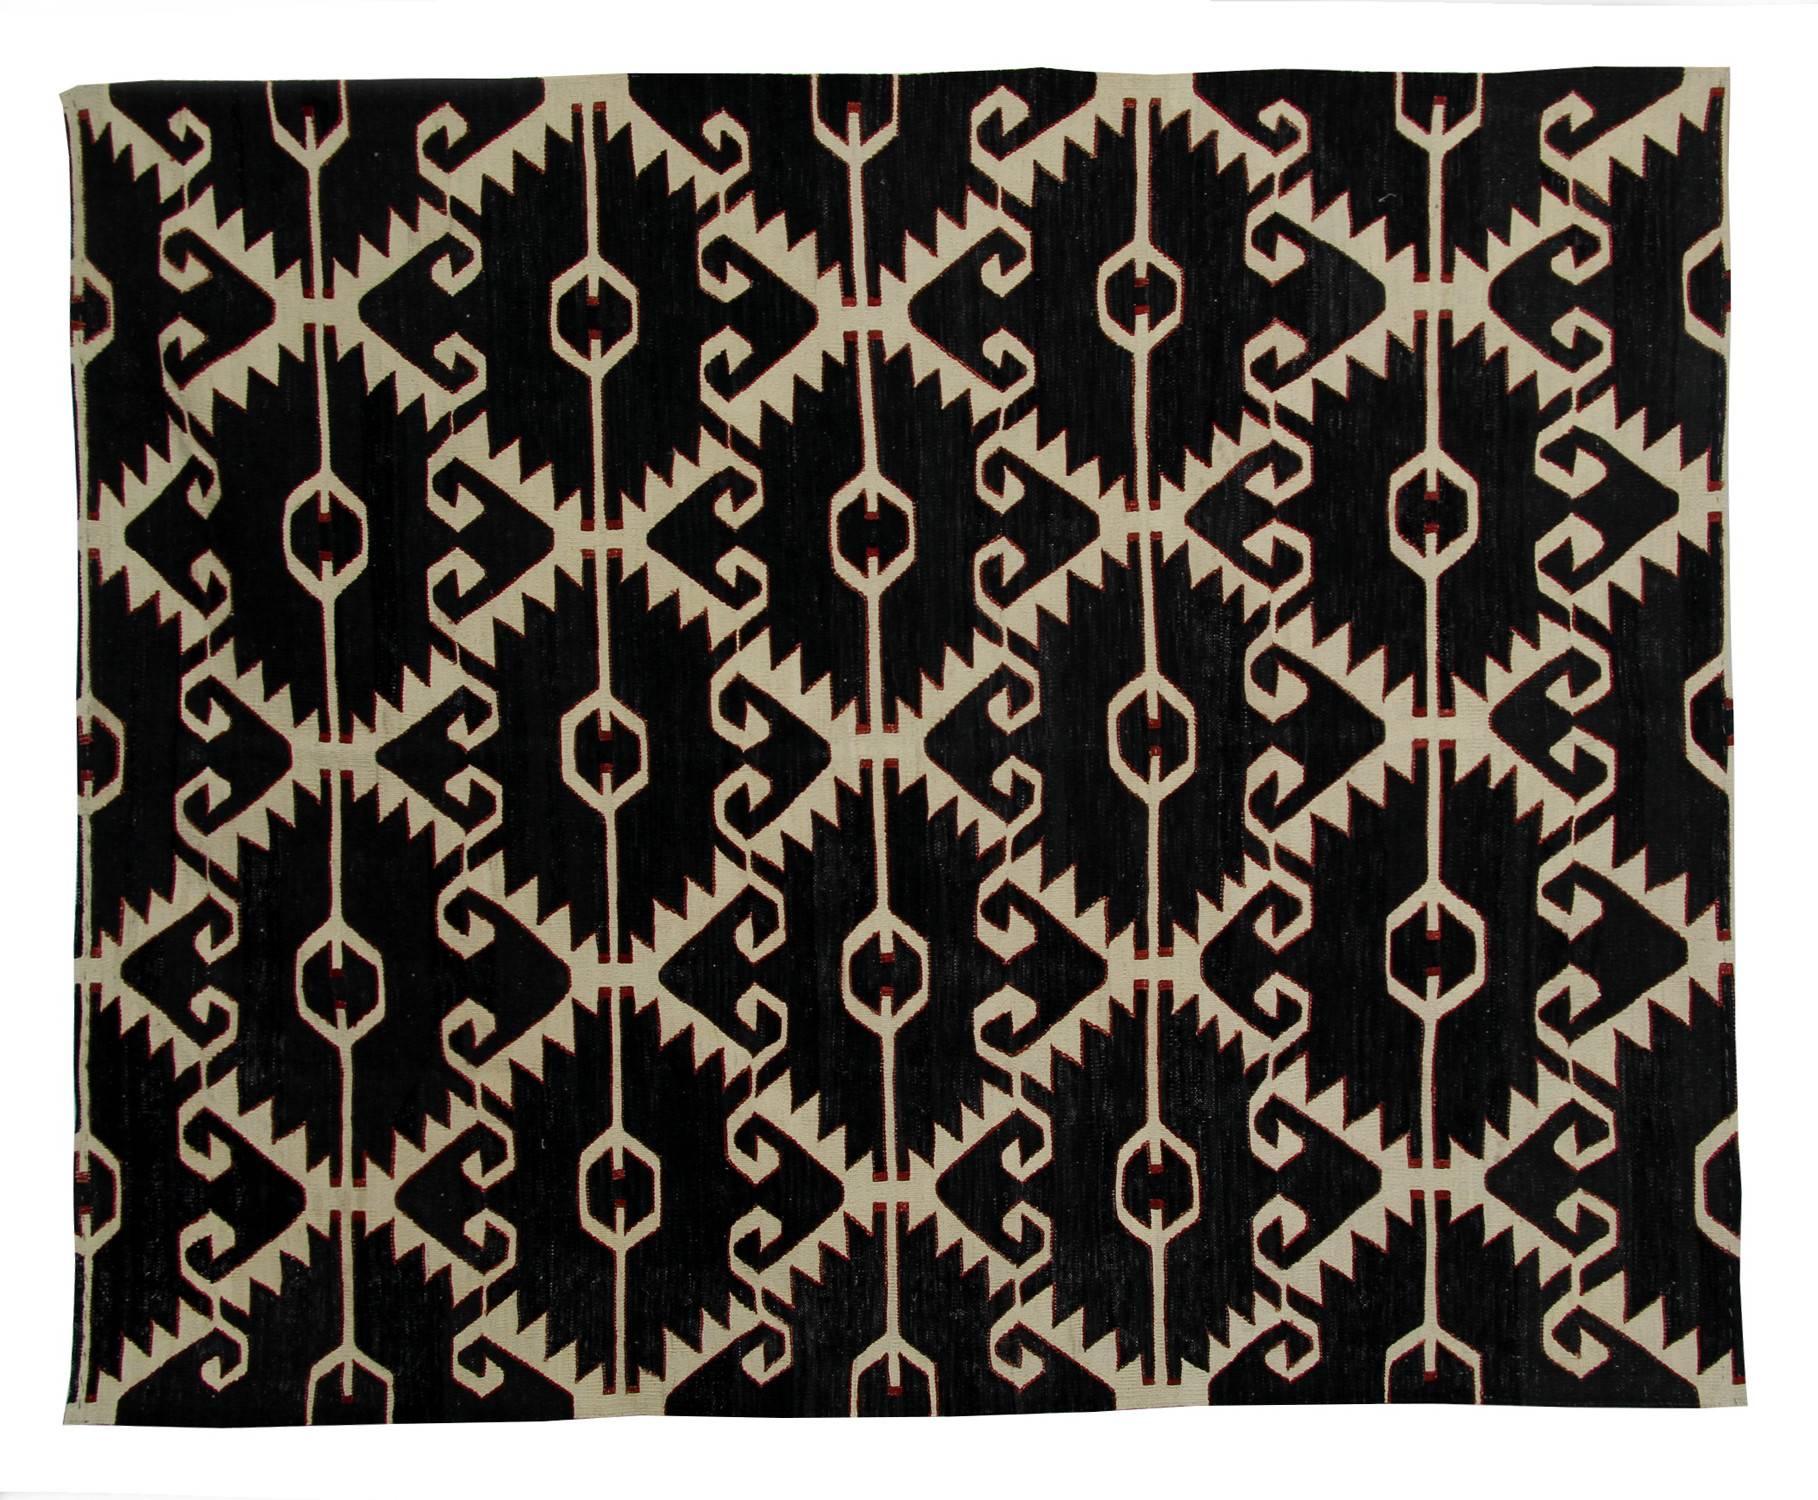 This black and white rug is astonishing because of the peculiarity of the woven rug design. The main color of the flat weave rug is black which is broken up by white lines of various shapes. The lines transport your imagination into a different